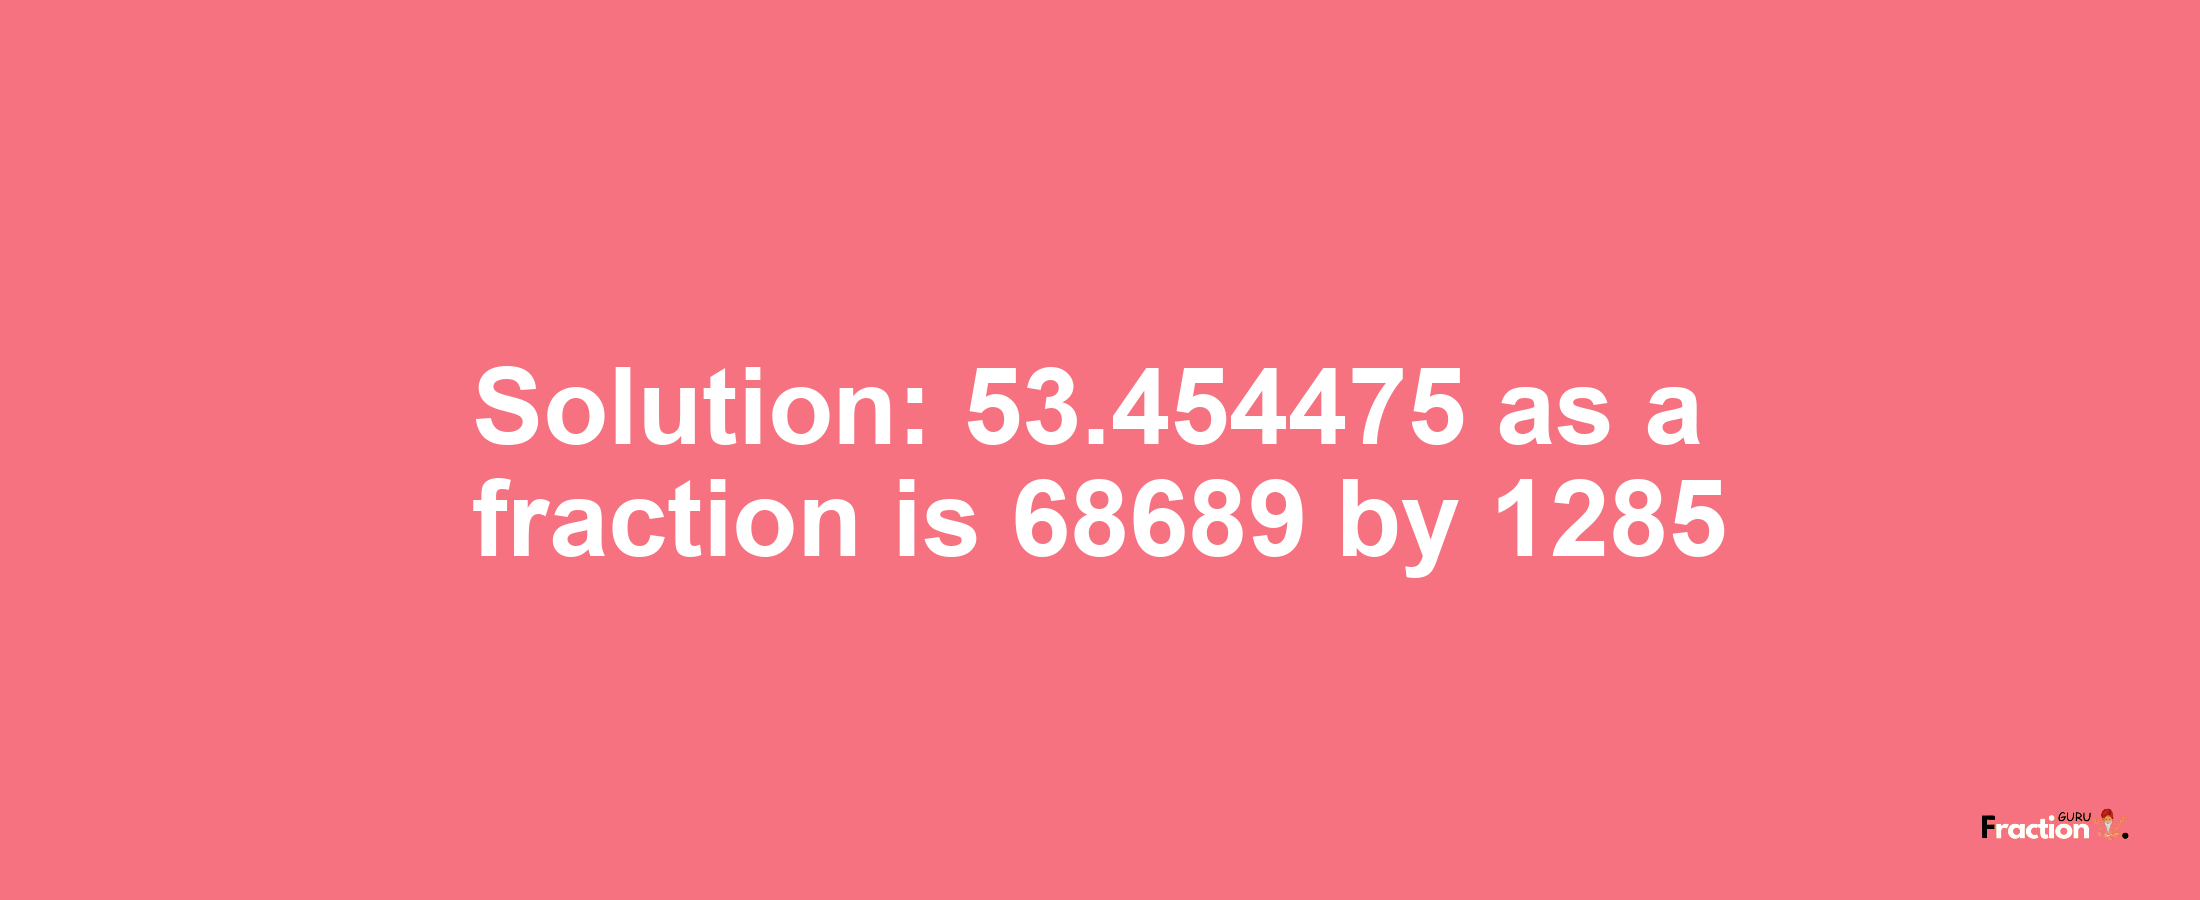 Solution:53.454475 as a fraction is 68689/1285